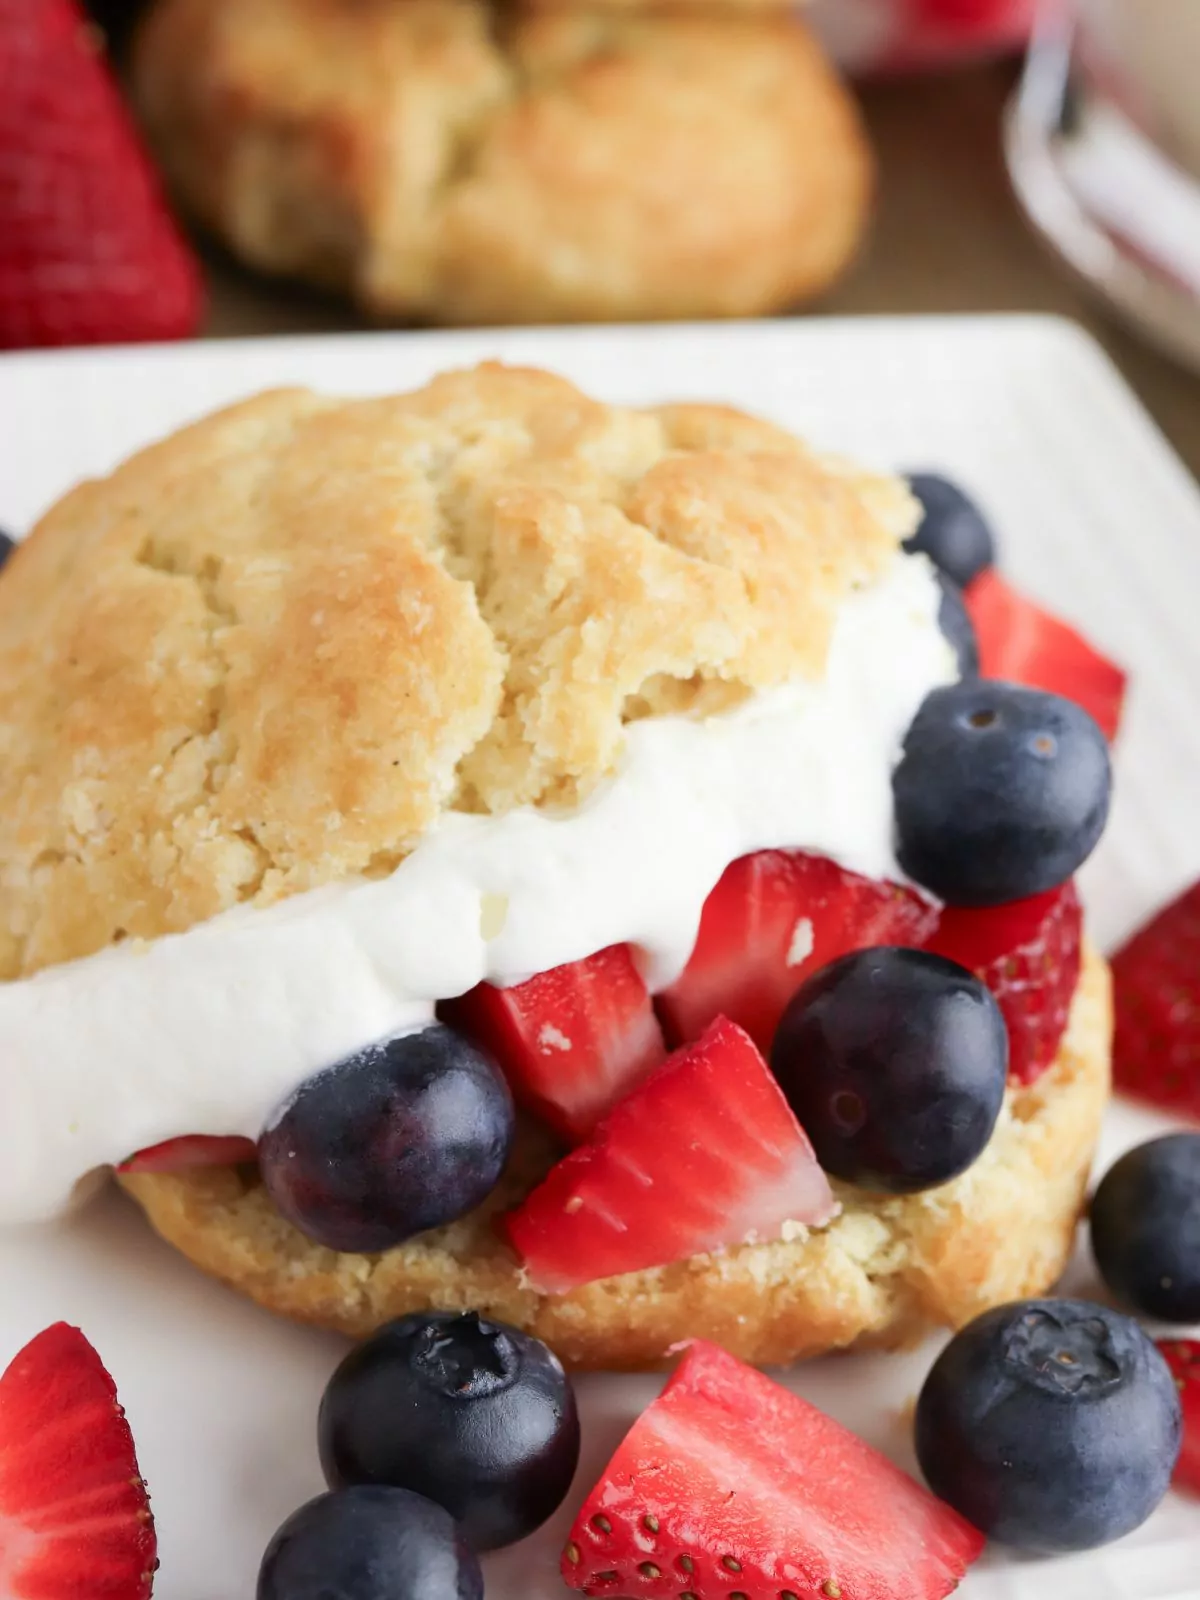 Traditional Strawberry Shortcake with blueberries too